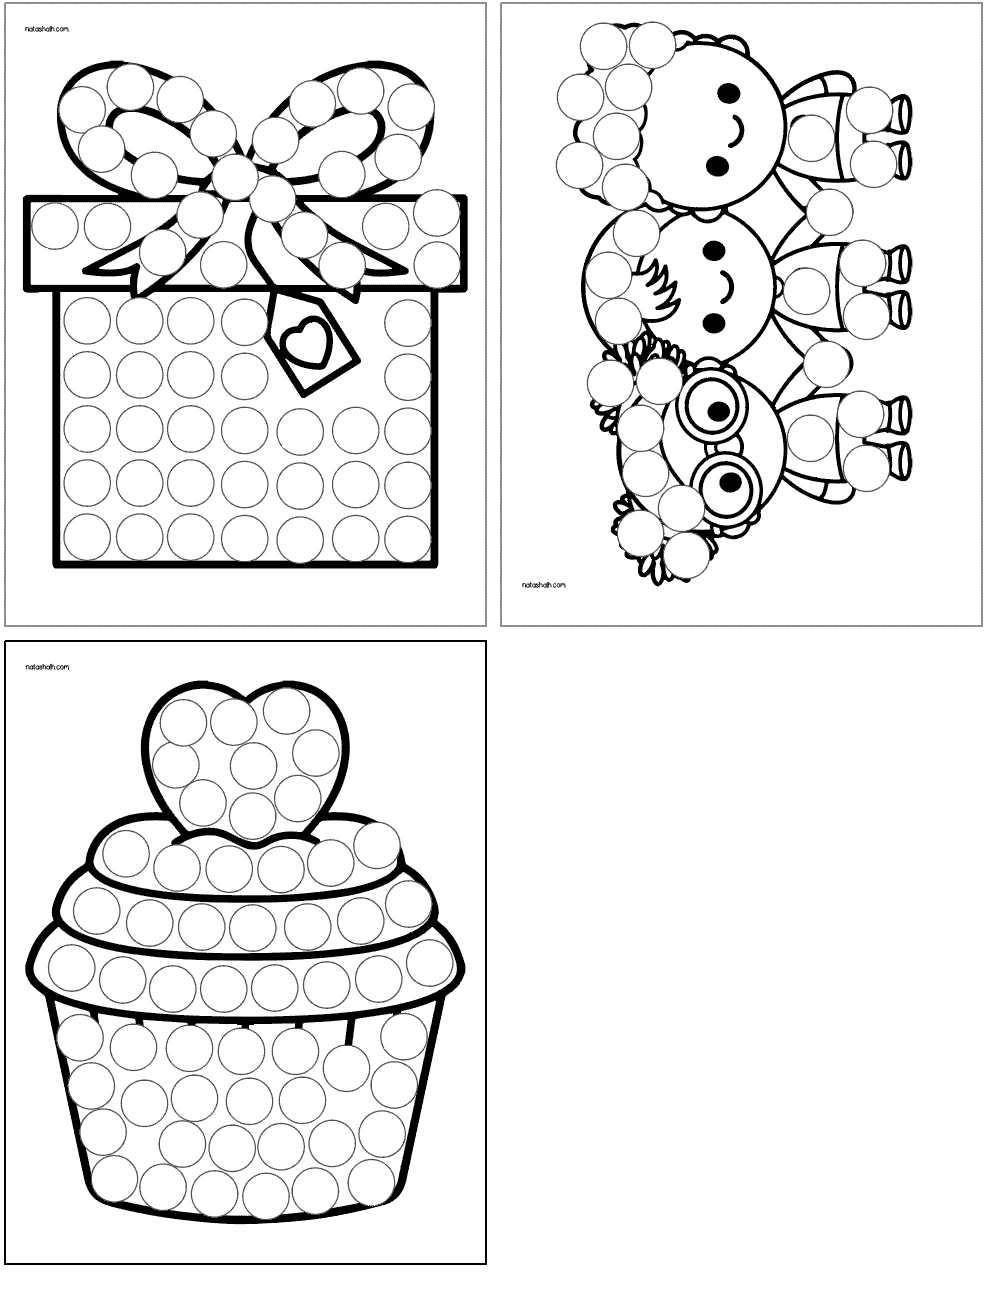 Three dot marker coloring pages for Valentine's Day including: a gift, three friends, and a cupcake